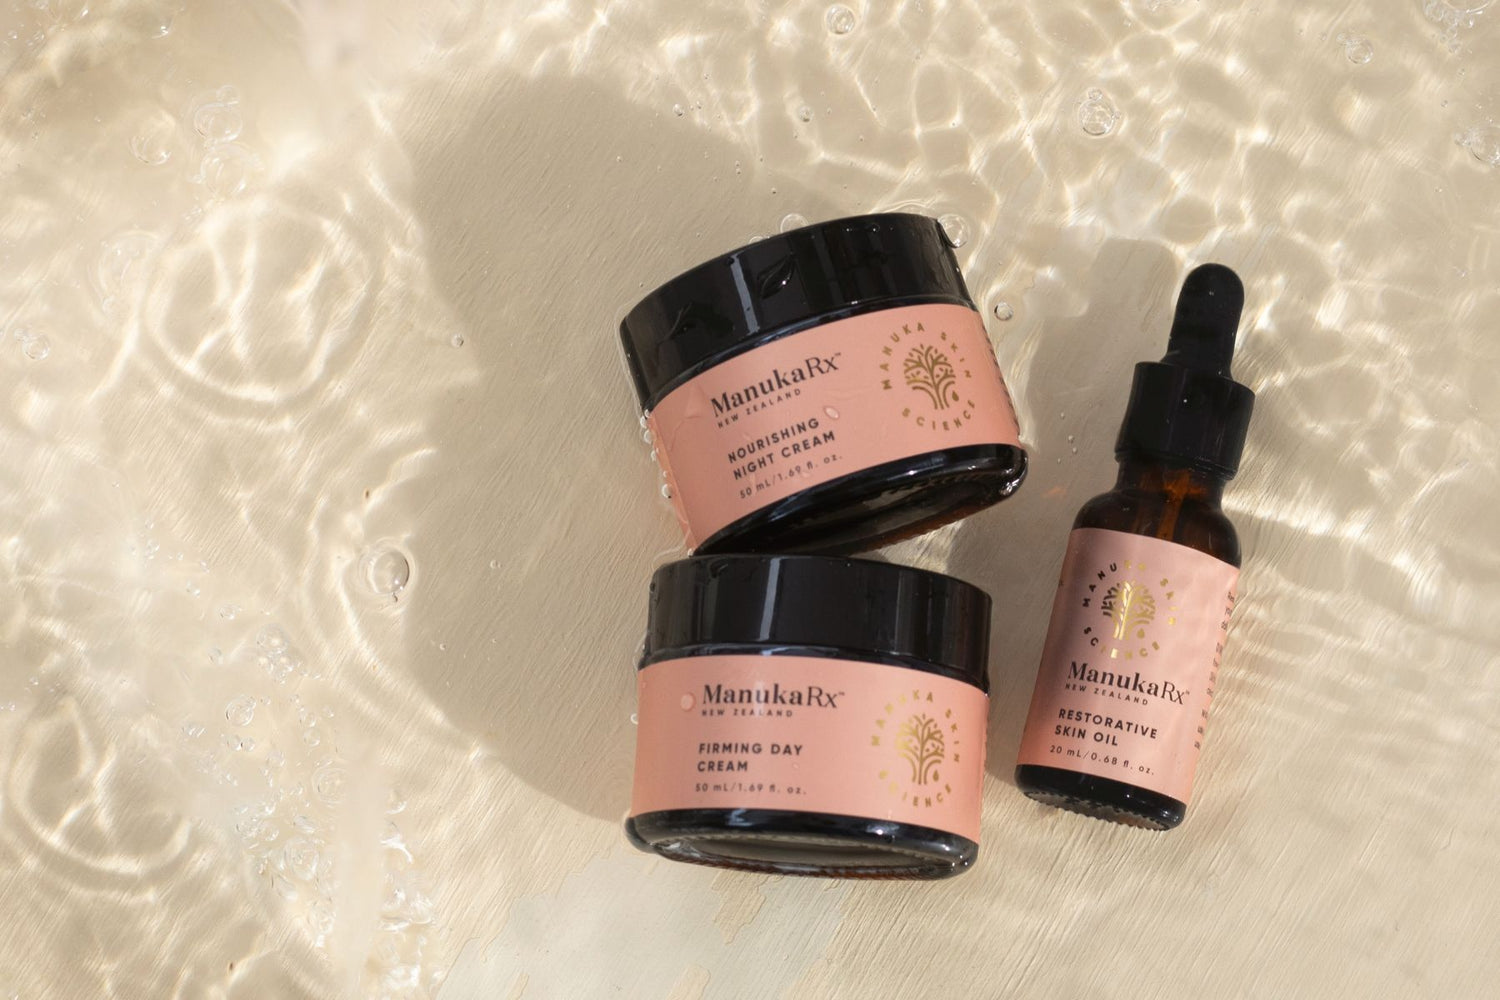 Introducing New and Improved skincare Products - Restorative Skin Oil, Firming Day Cream and Nourishing Night Cream